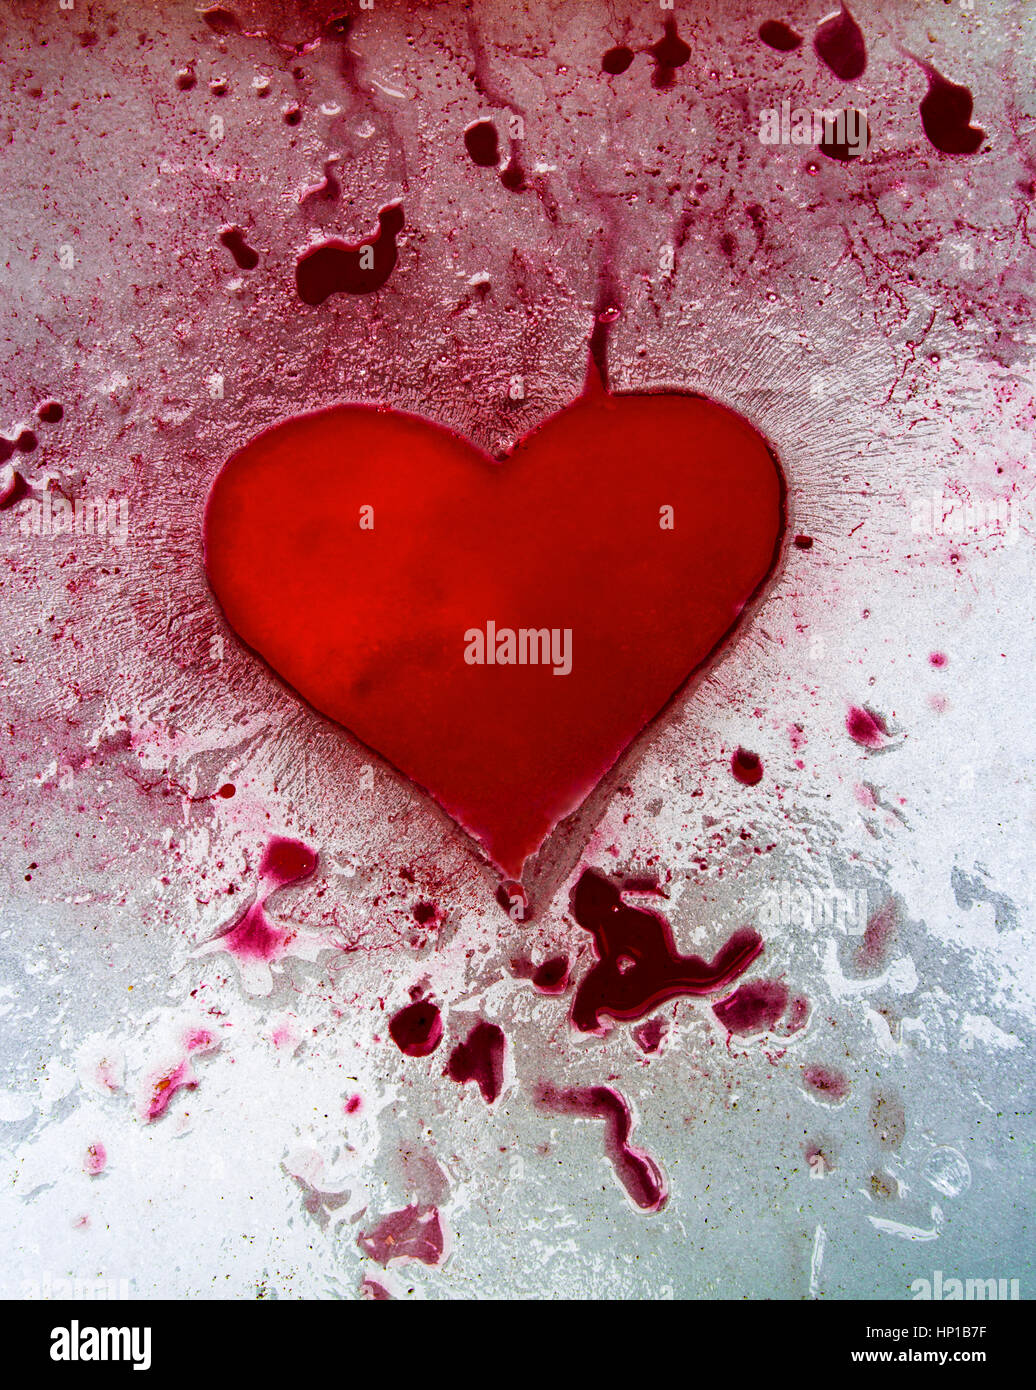 Red ink heart on ice. Red ink pooling into a heart shaped hollow, and across and into other depressions in the surface of ice. Stock Photo